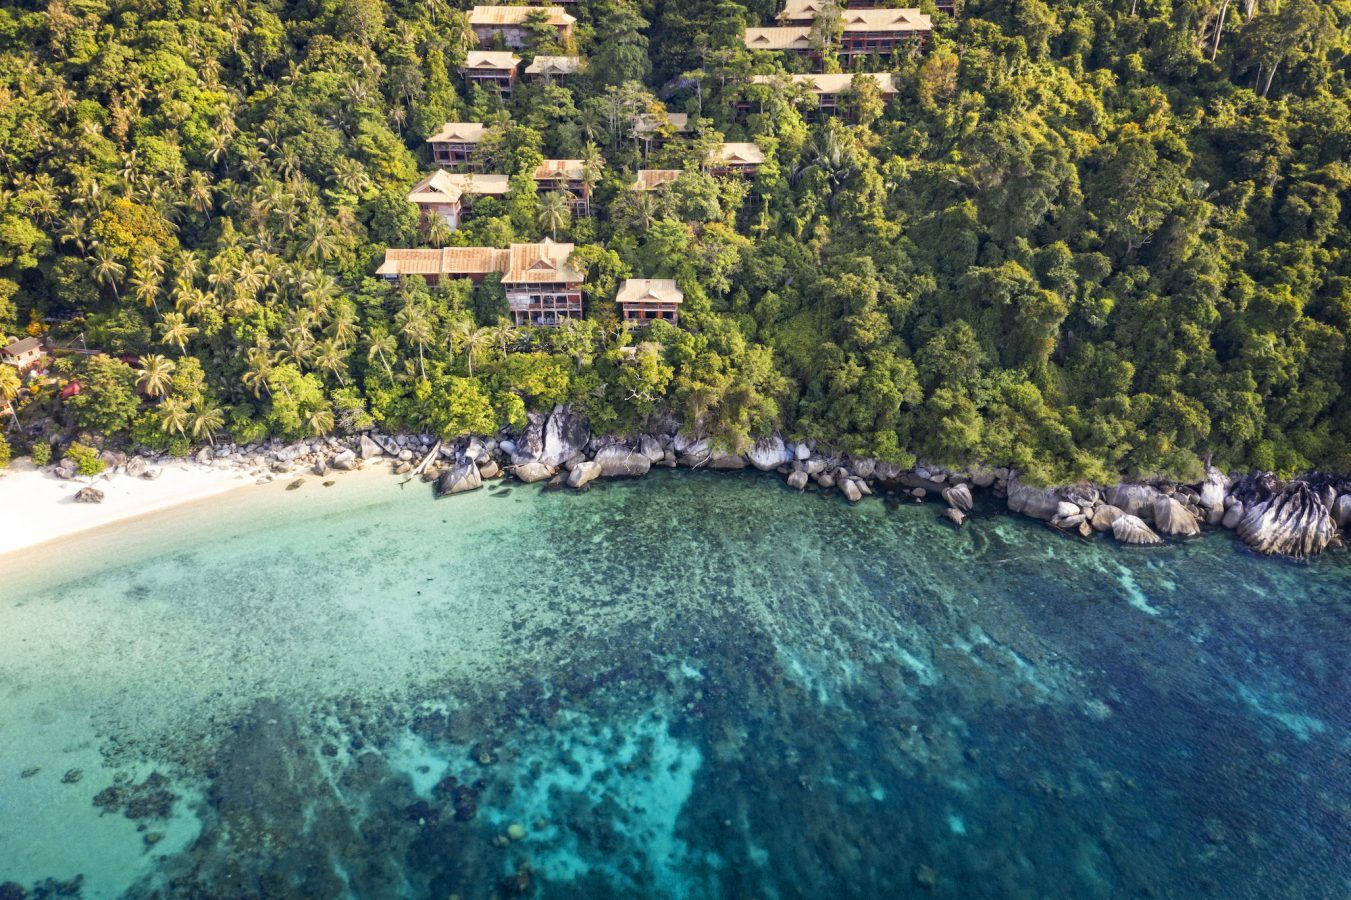 8 stunning island resorts in Malaysia to add to your bucket list